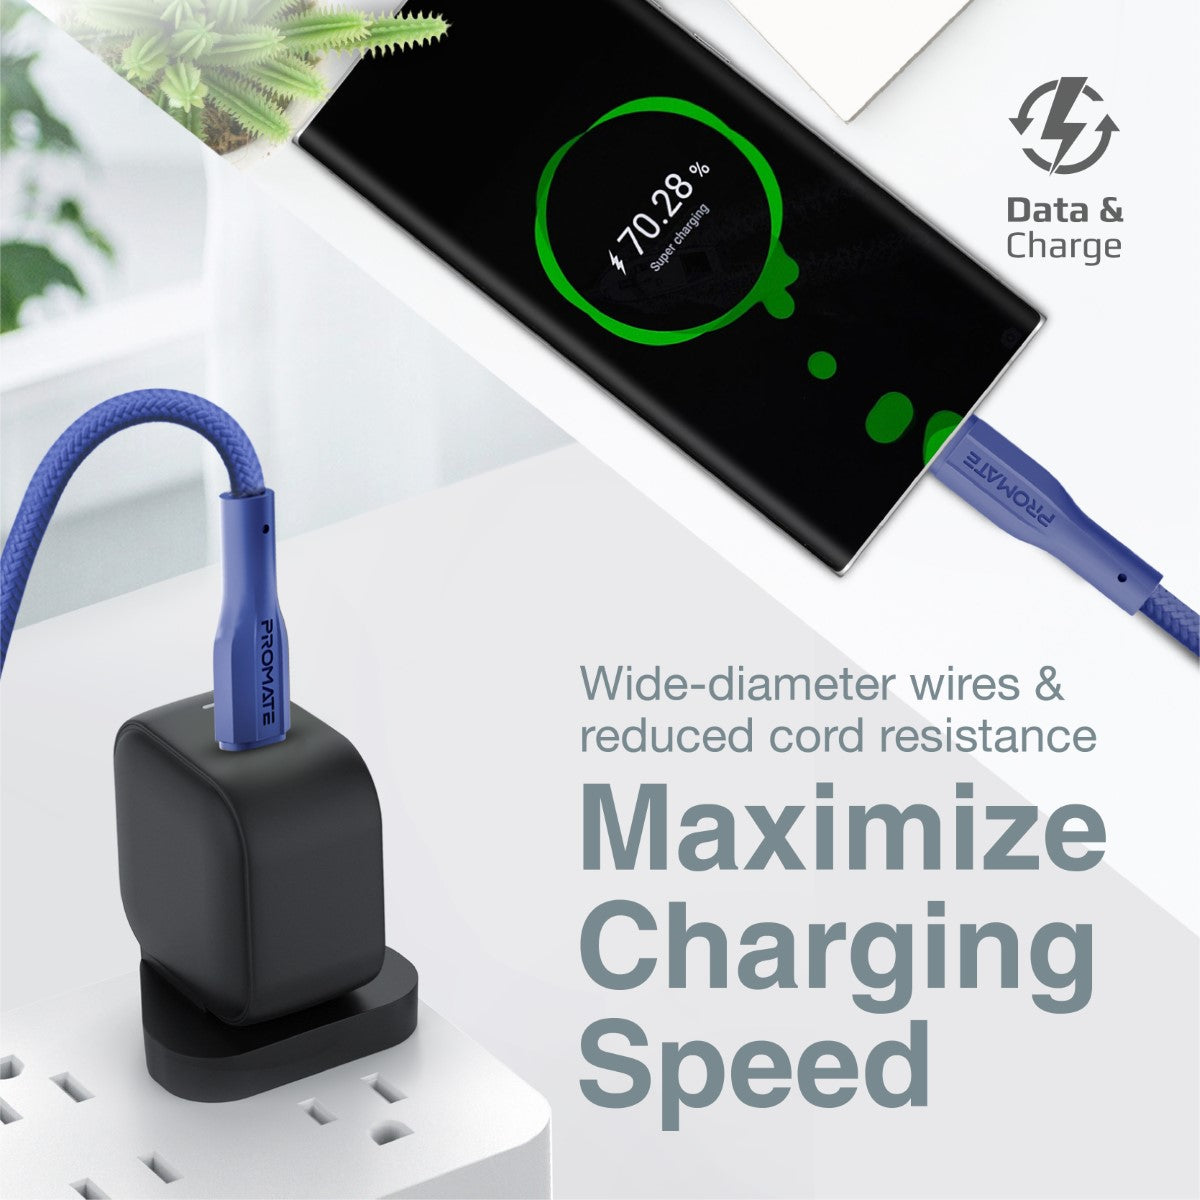 Promate USB-C to USB-C 100cm Silicone Cord Cable 2A Fast Charging, USB Cable(Black, Blue, White)